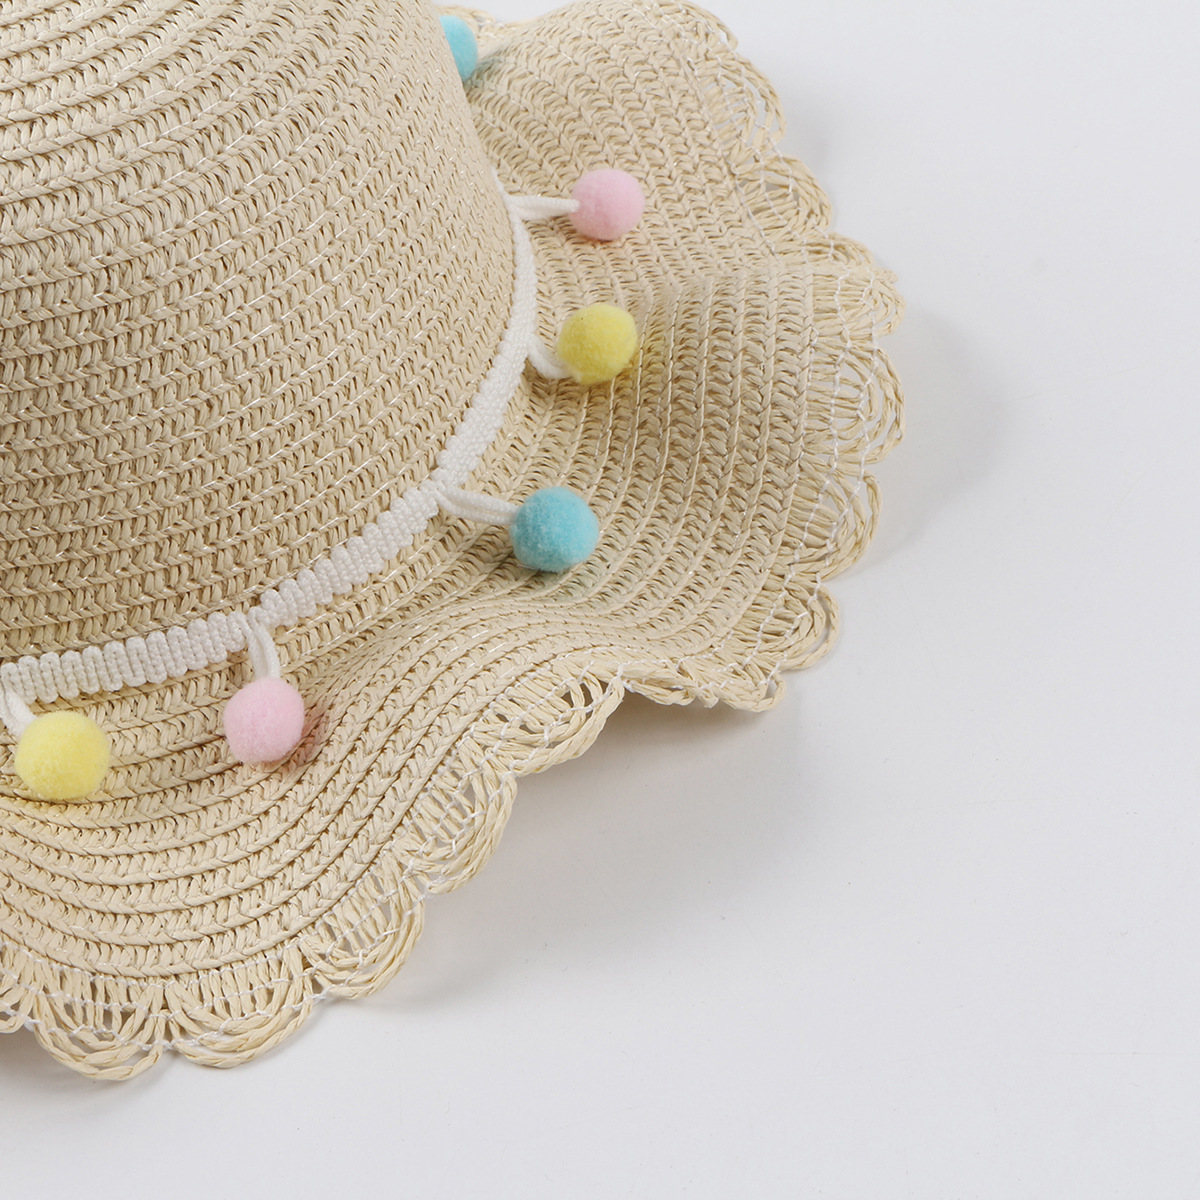 Summer new fashion hat wave edge colored straw hat female big eaves sun hatpicture6